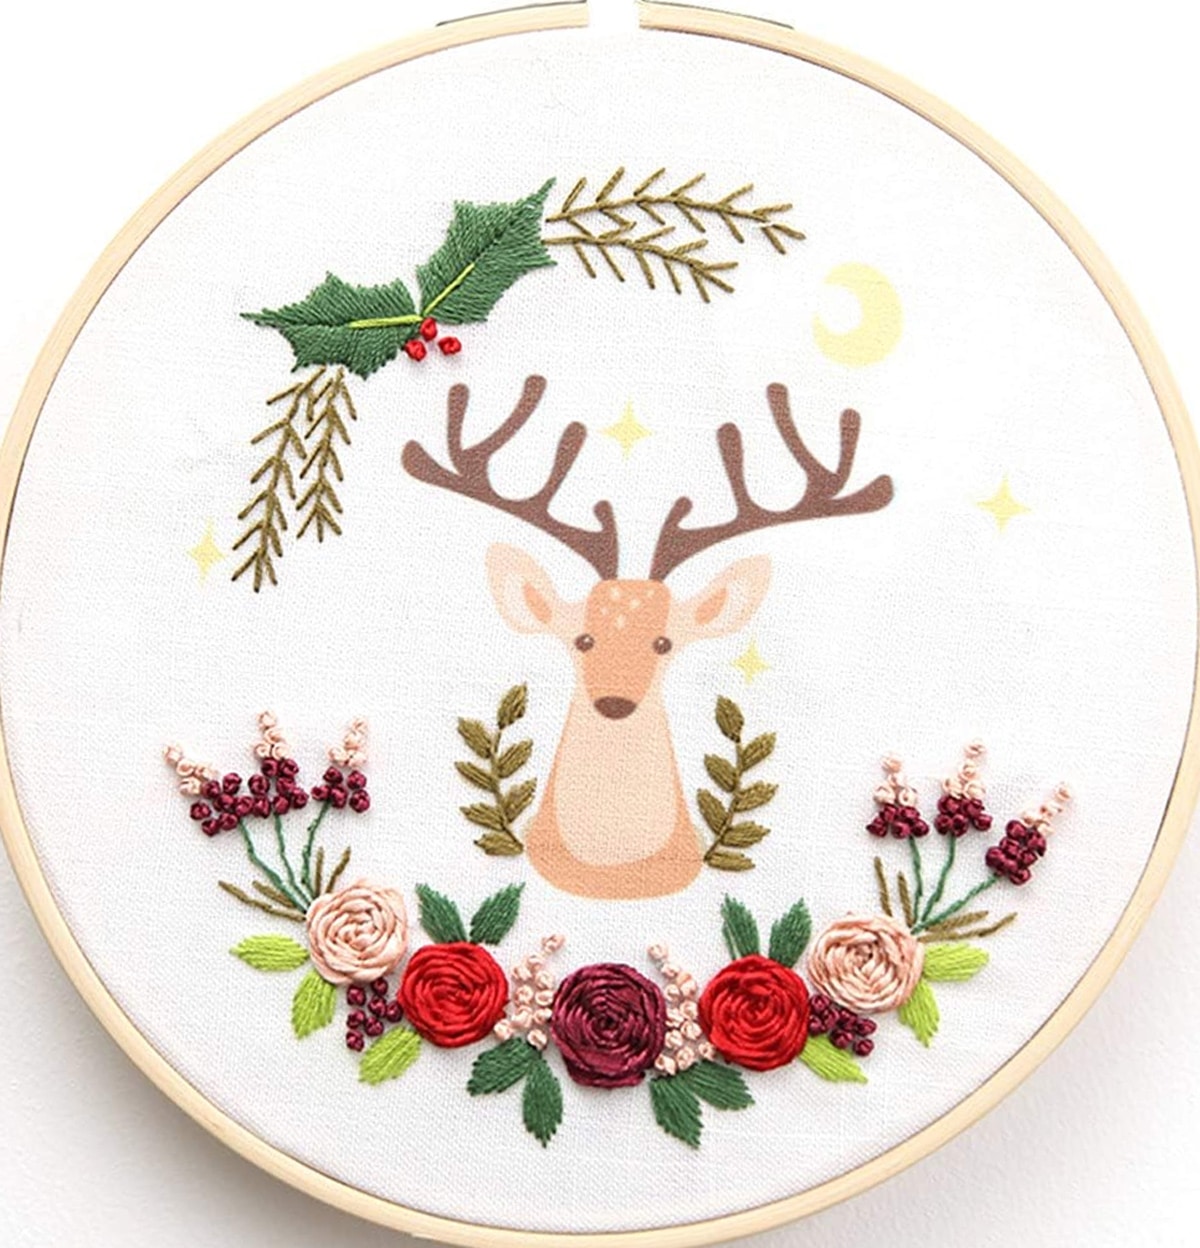 embroidery pattern of deer and flowers